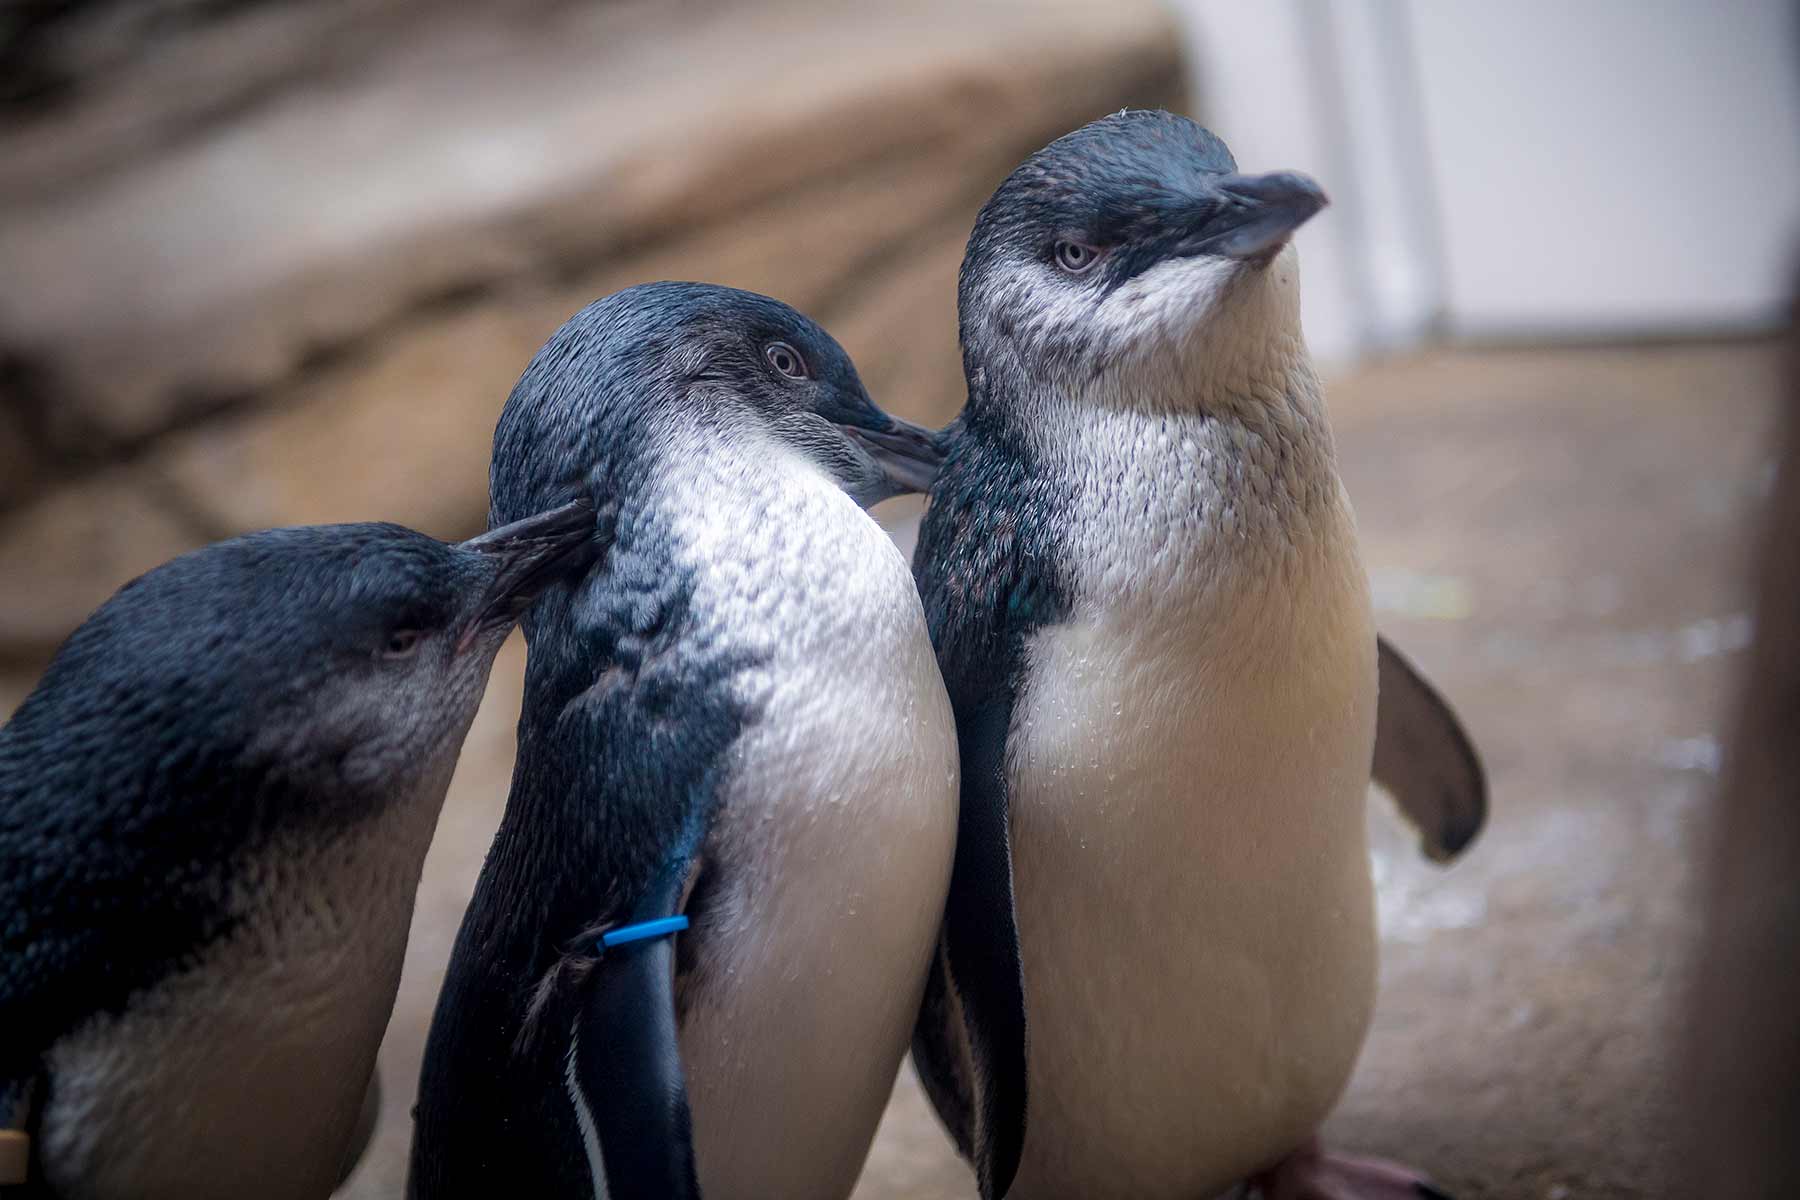 A group of penguins participate in a type of grooming called preening.